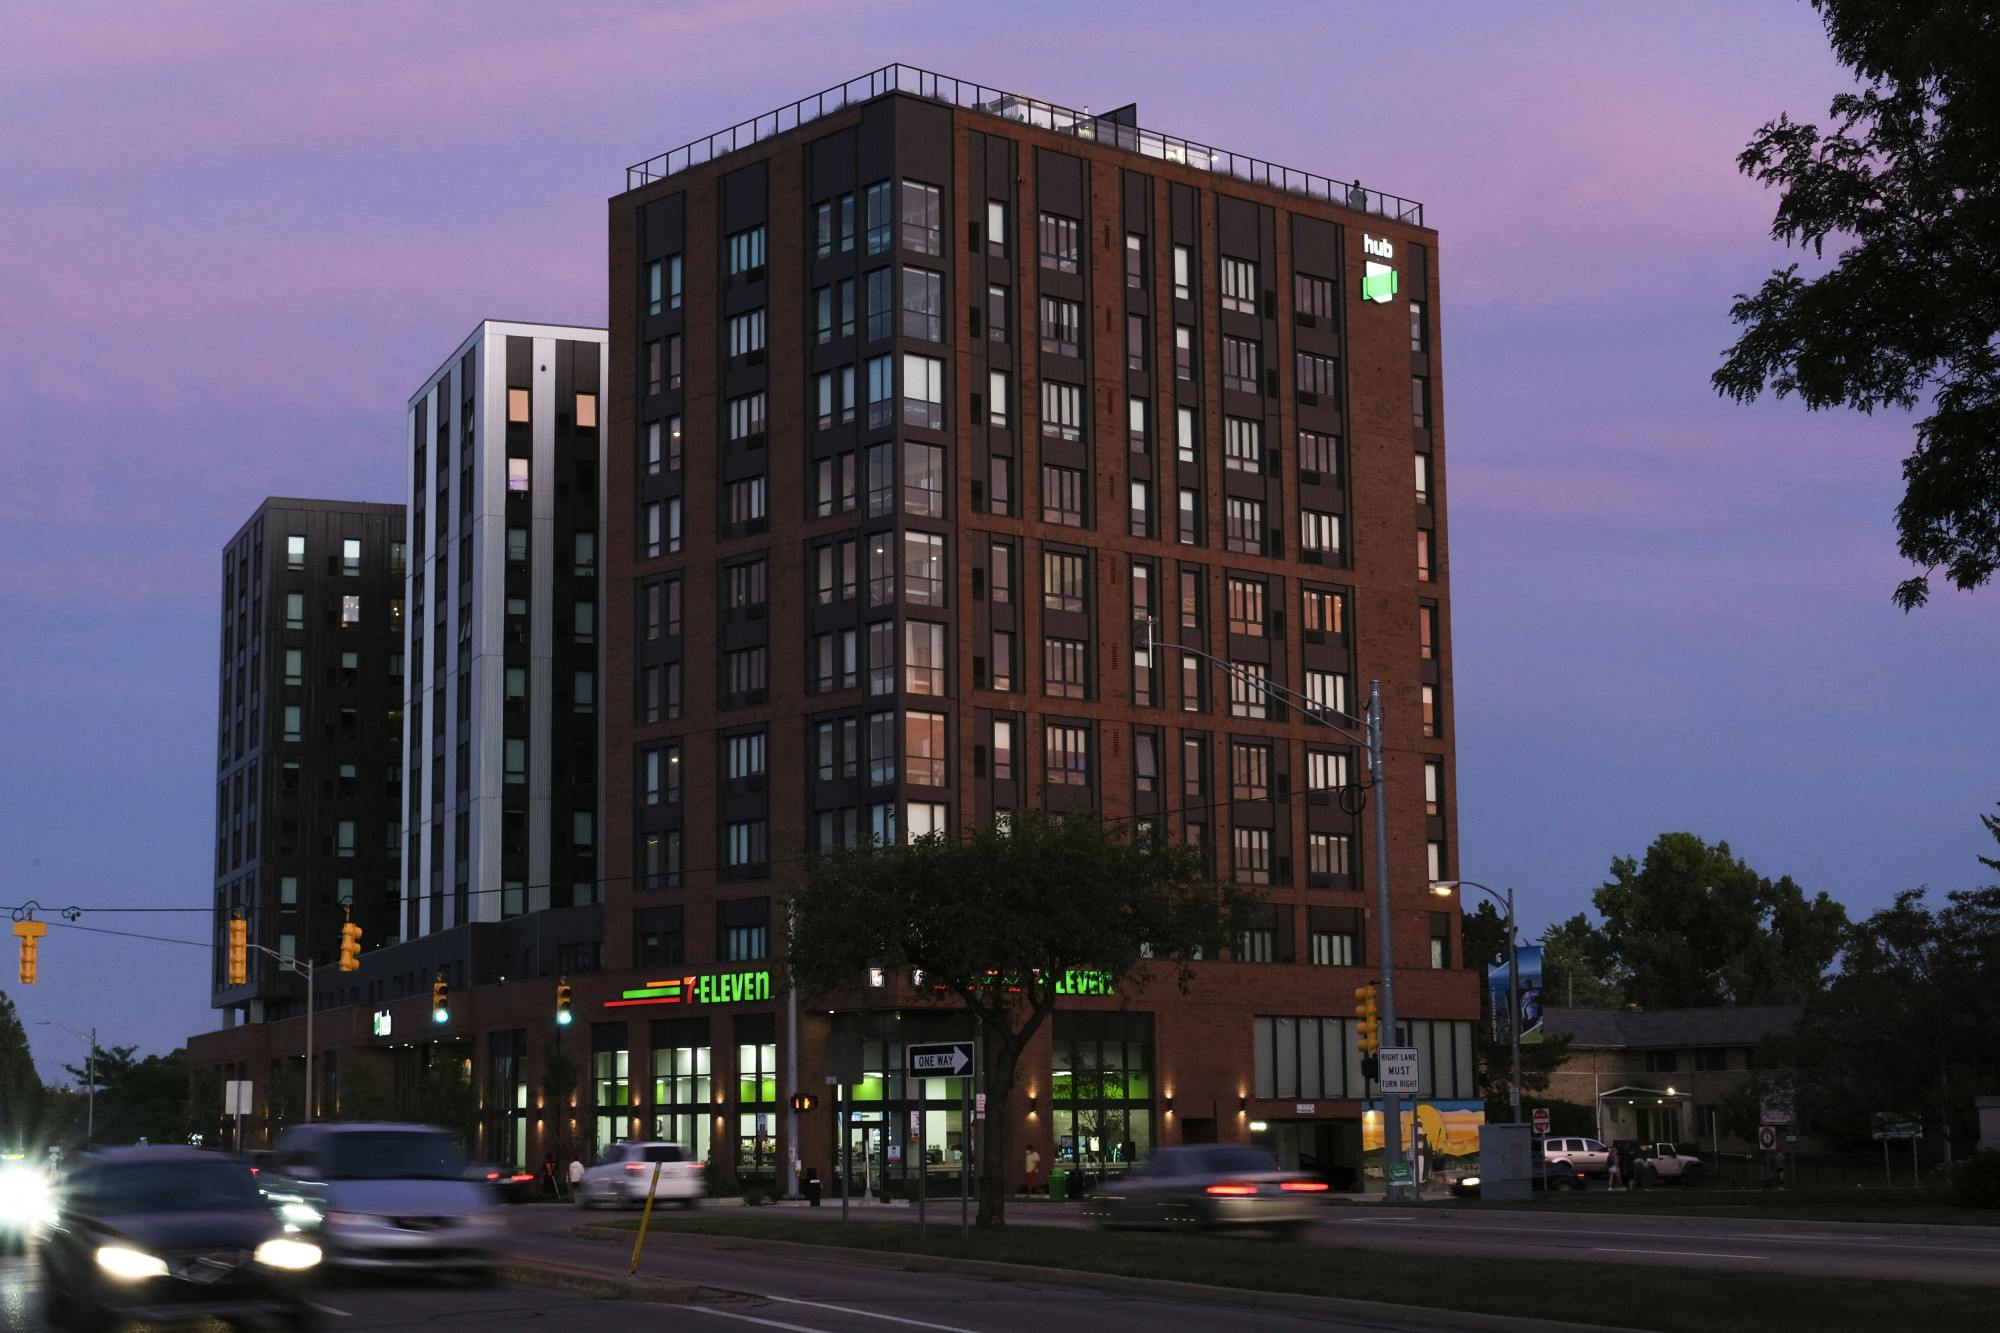 The Hub off-campus housing at sunset September 2, 2020